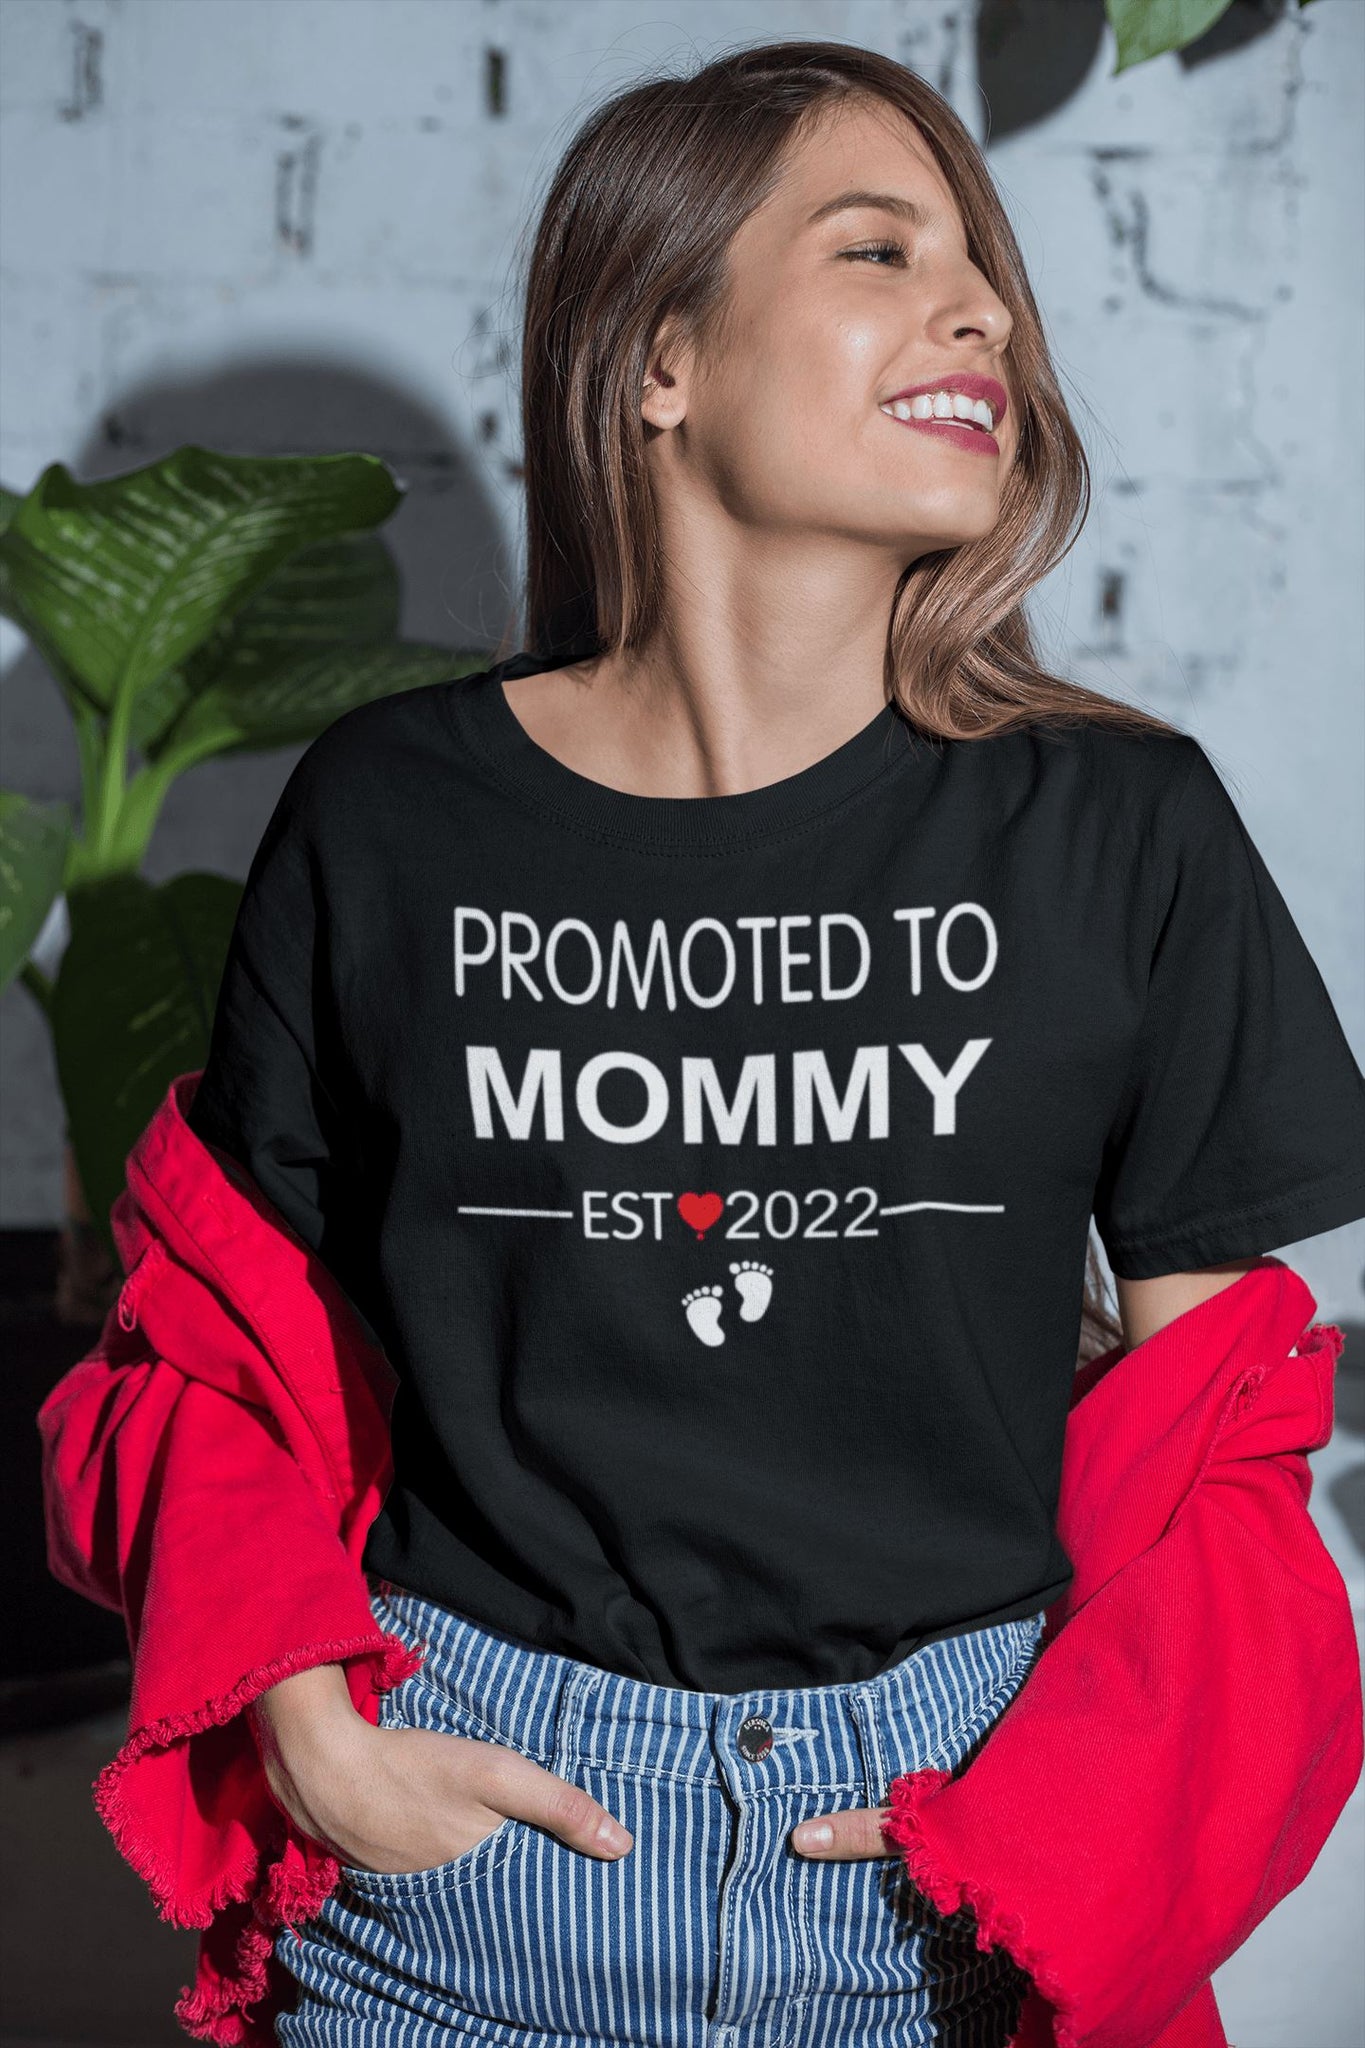 Promoted to Mommy Est. 2022 Special T Shirt for Women - Catch My Drift India  black, clothing, female, made in india, parents, shirt, t shirt, tshirt